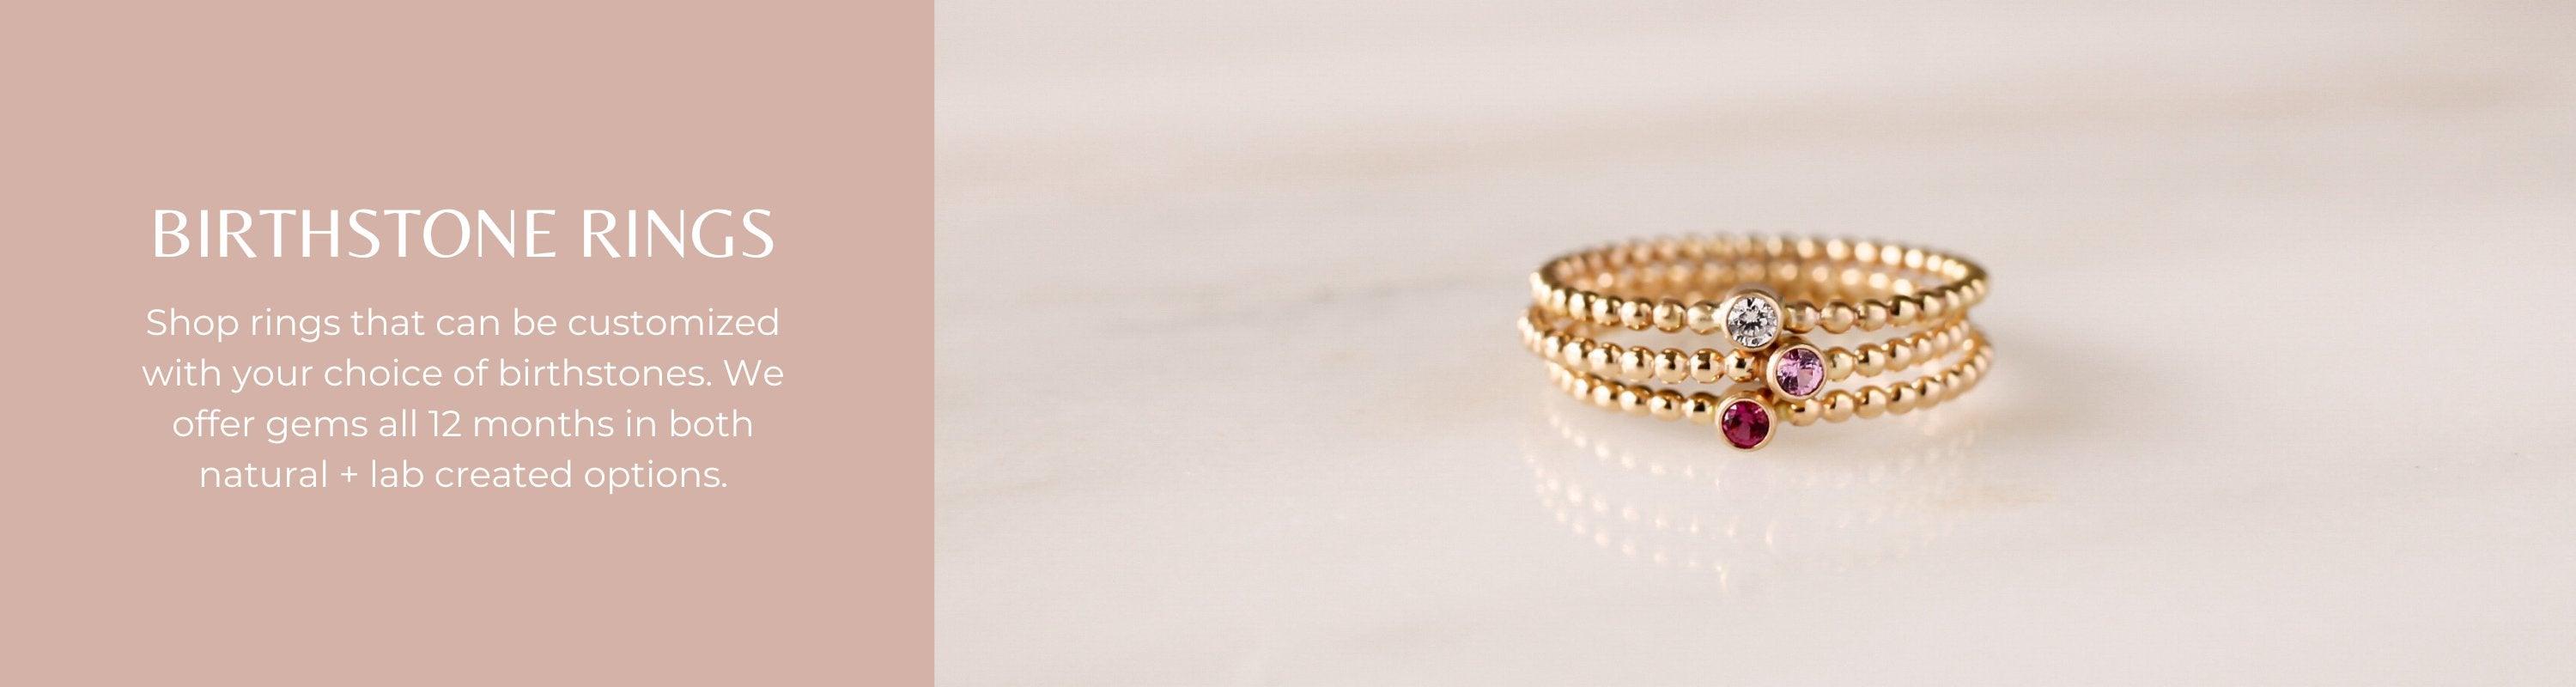 Birthstone Rings - Nolia Jewelry - Meaningful + Sustainably Handcrafted Jewelry